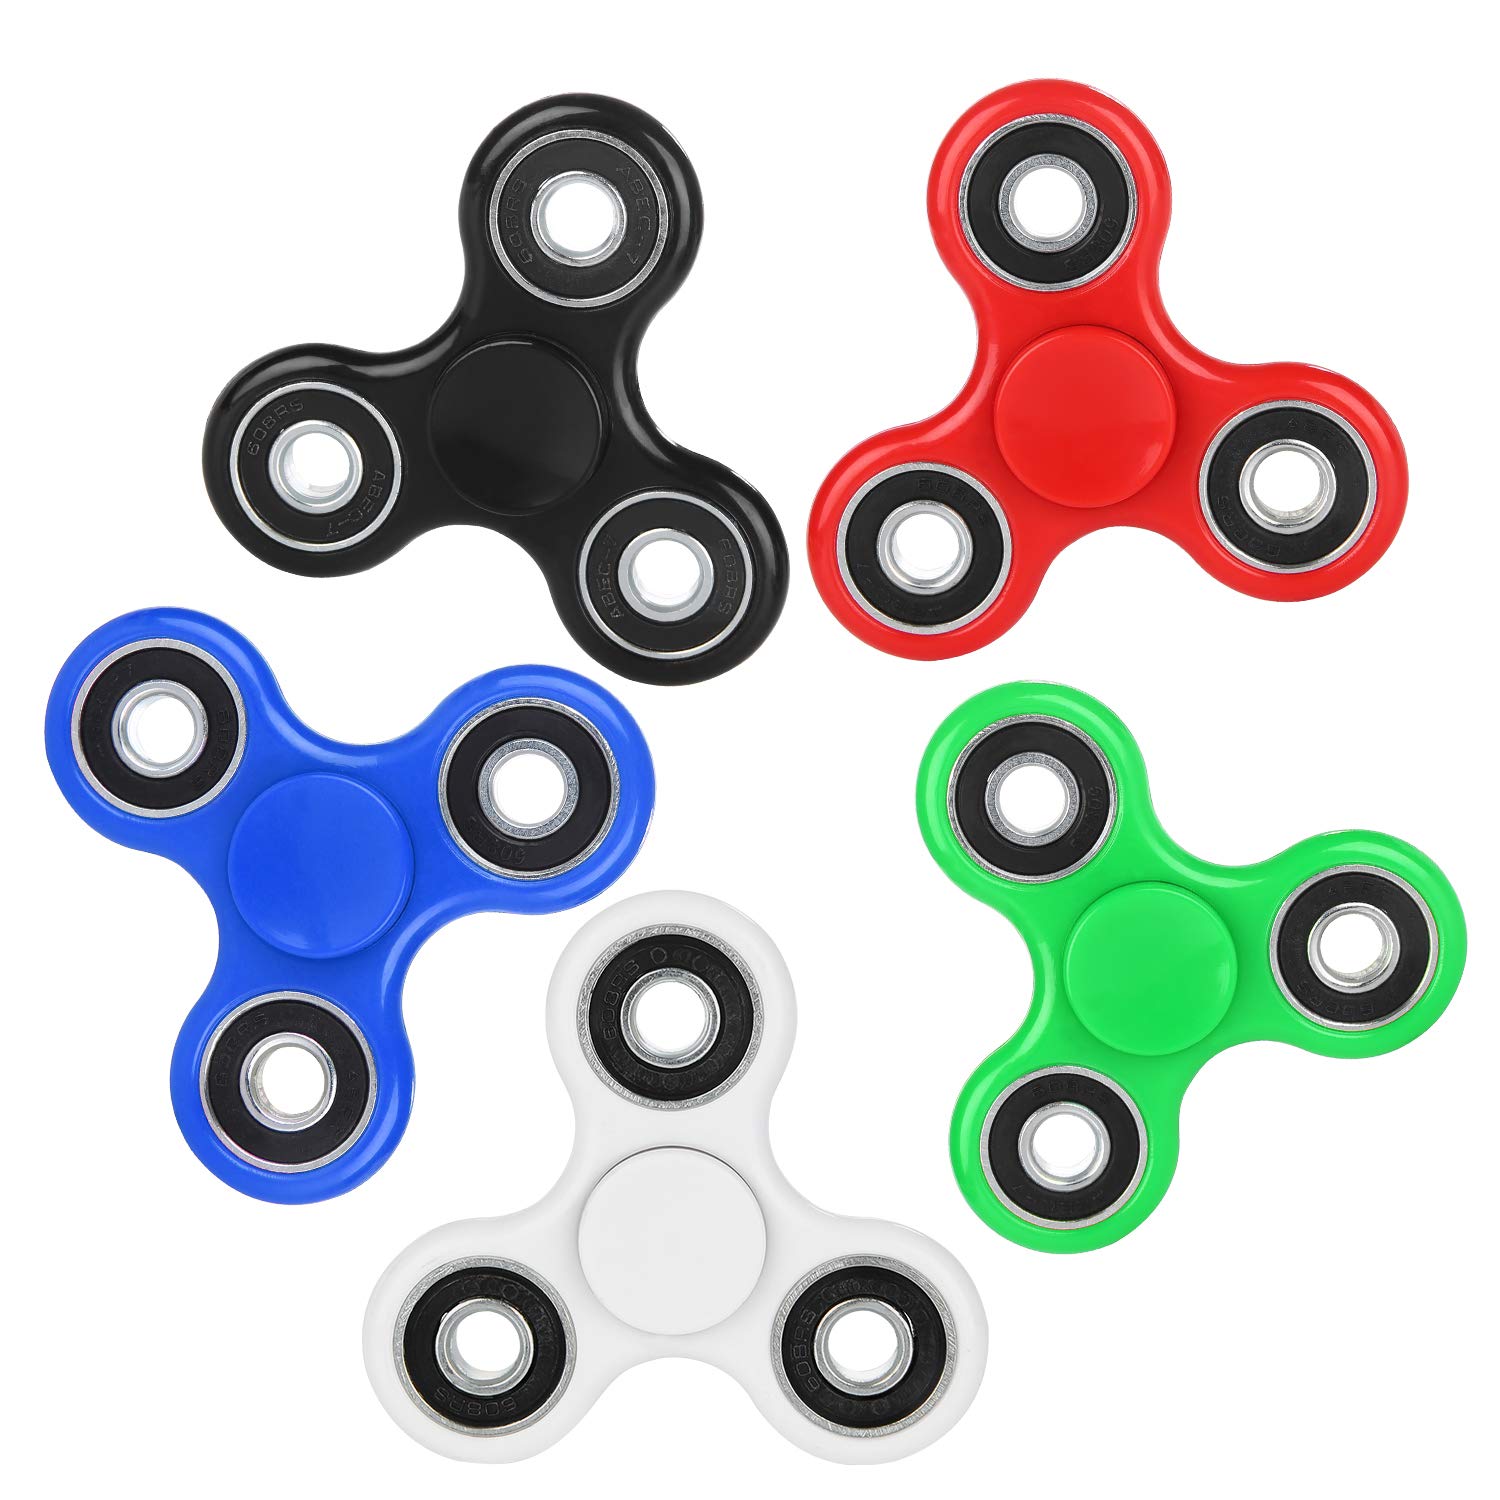 SCIONE Fidget Toys 5 Pack,Fidget Spinners Pack for Kids/Adults-Sensory Fidget Toys Packs-ADHD Anxiety Toys Stress Relief Reducer Autism Fidgets Best EDC Hand Spinner Finger Bearing Trispinner Toy